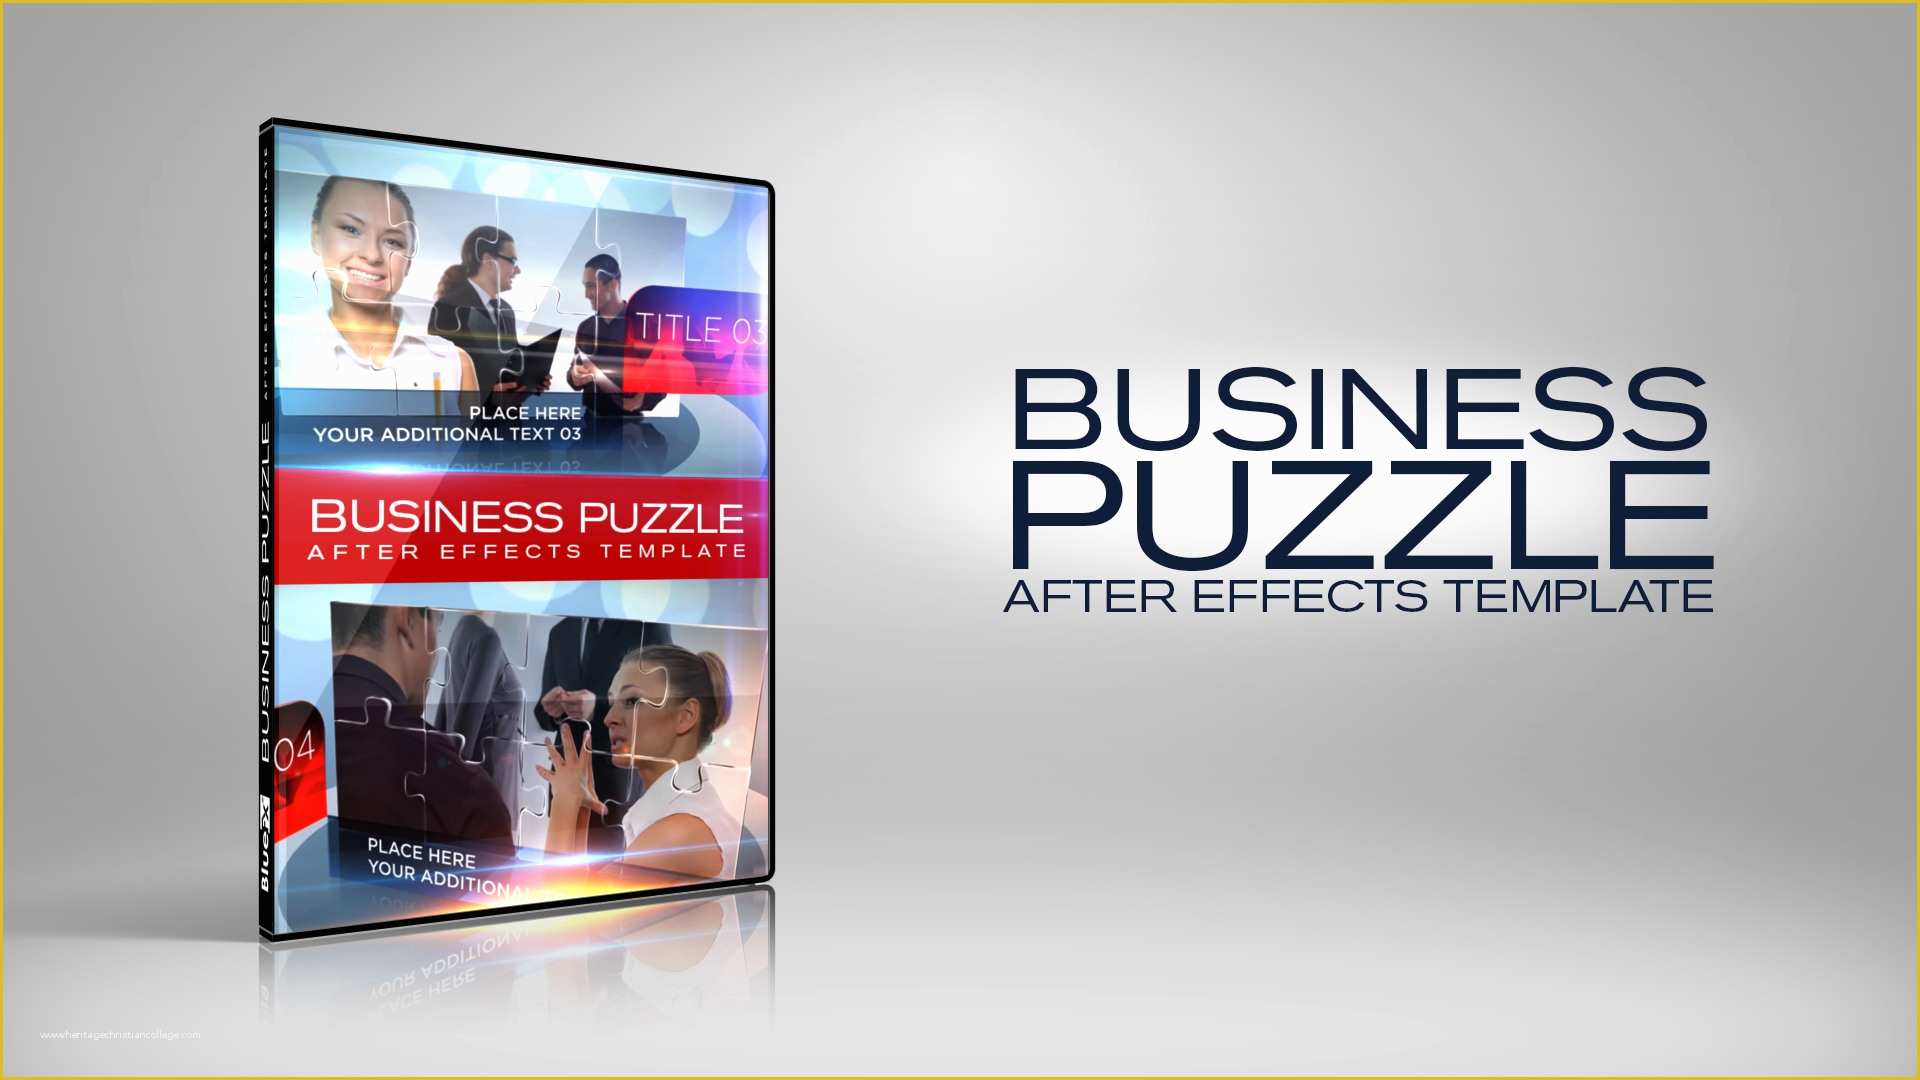 Free Video Templates after Effects Of Business Puzzle after Effects Template